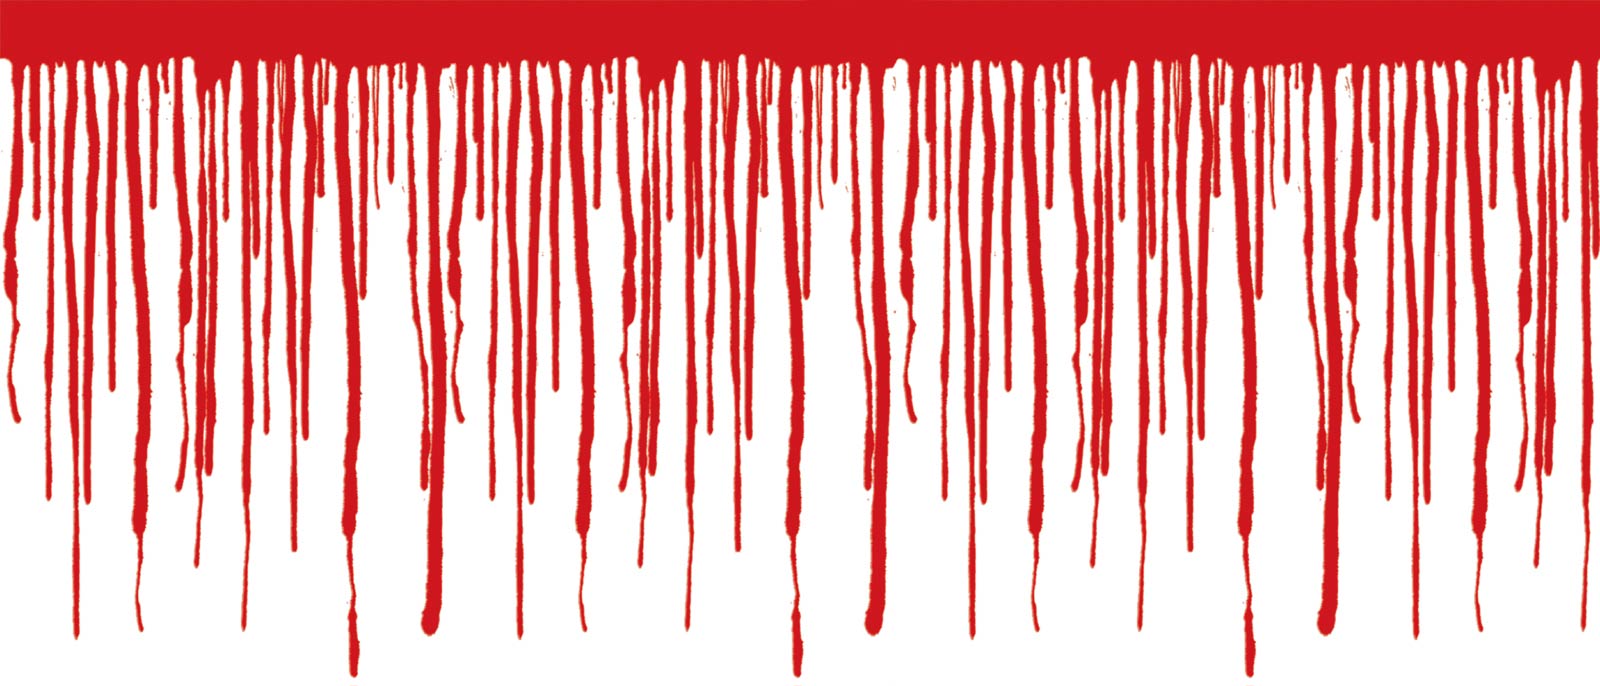 dripping blood clipart border - photo #22